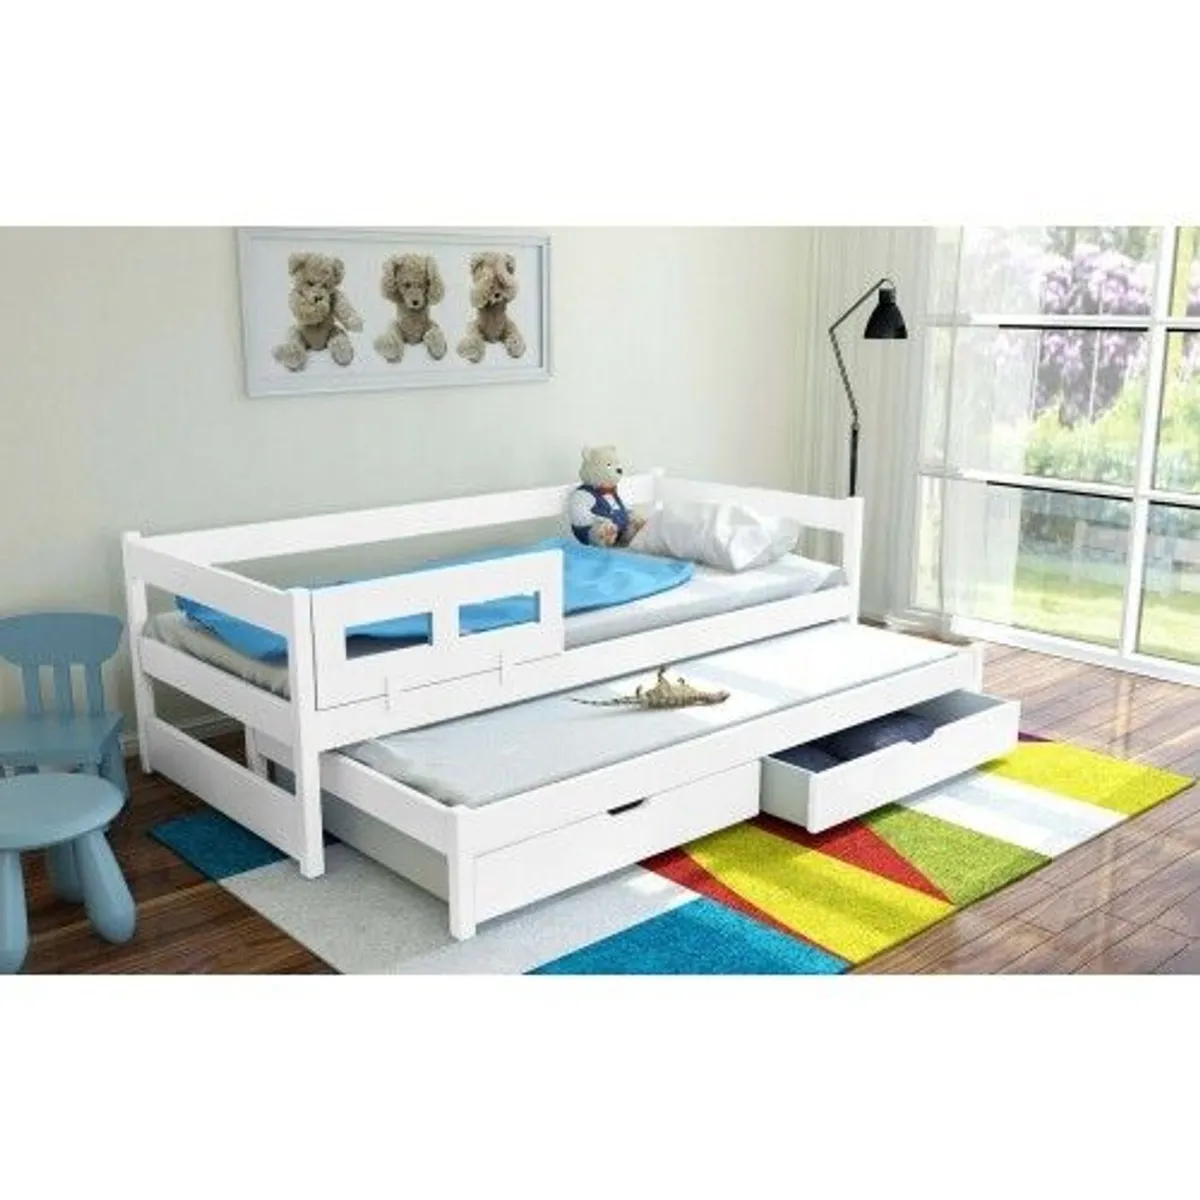 Kids Trundle Bed Tomek free mattresses and Delivery